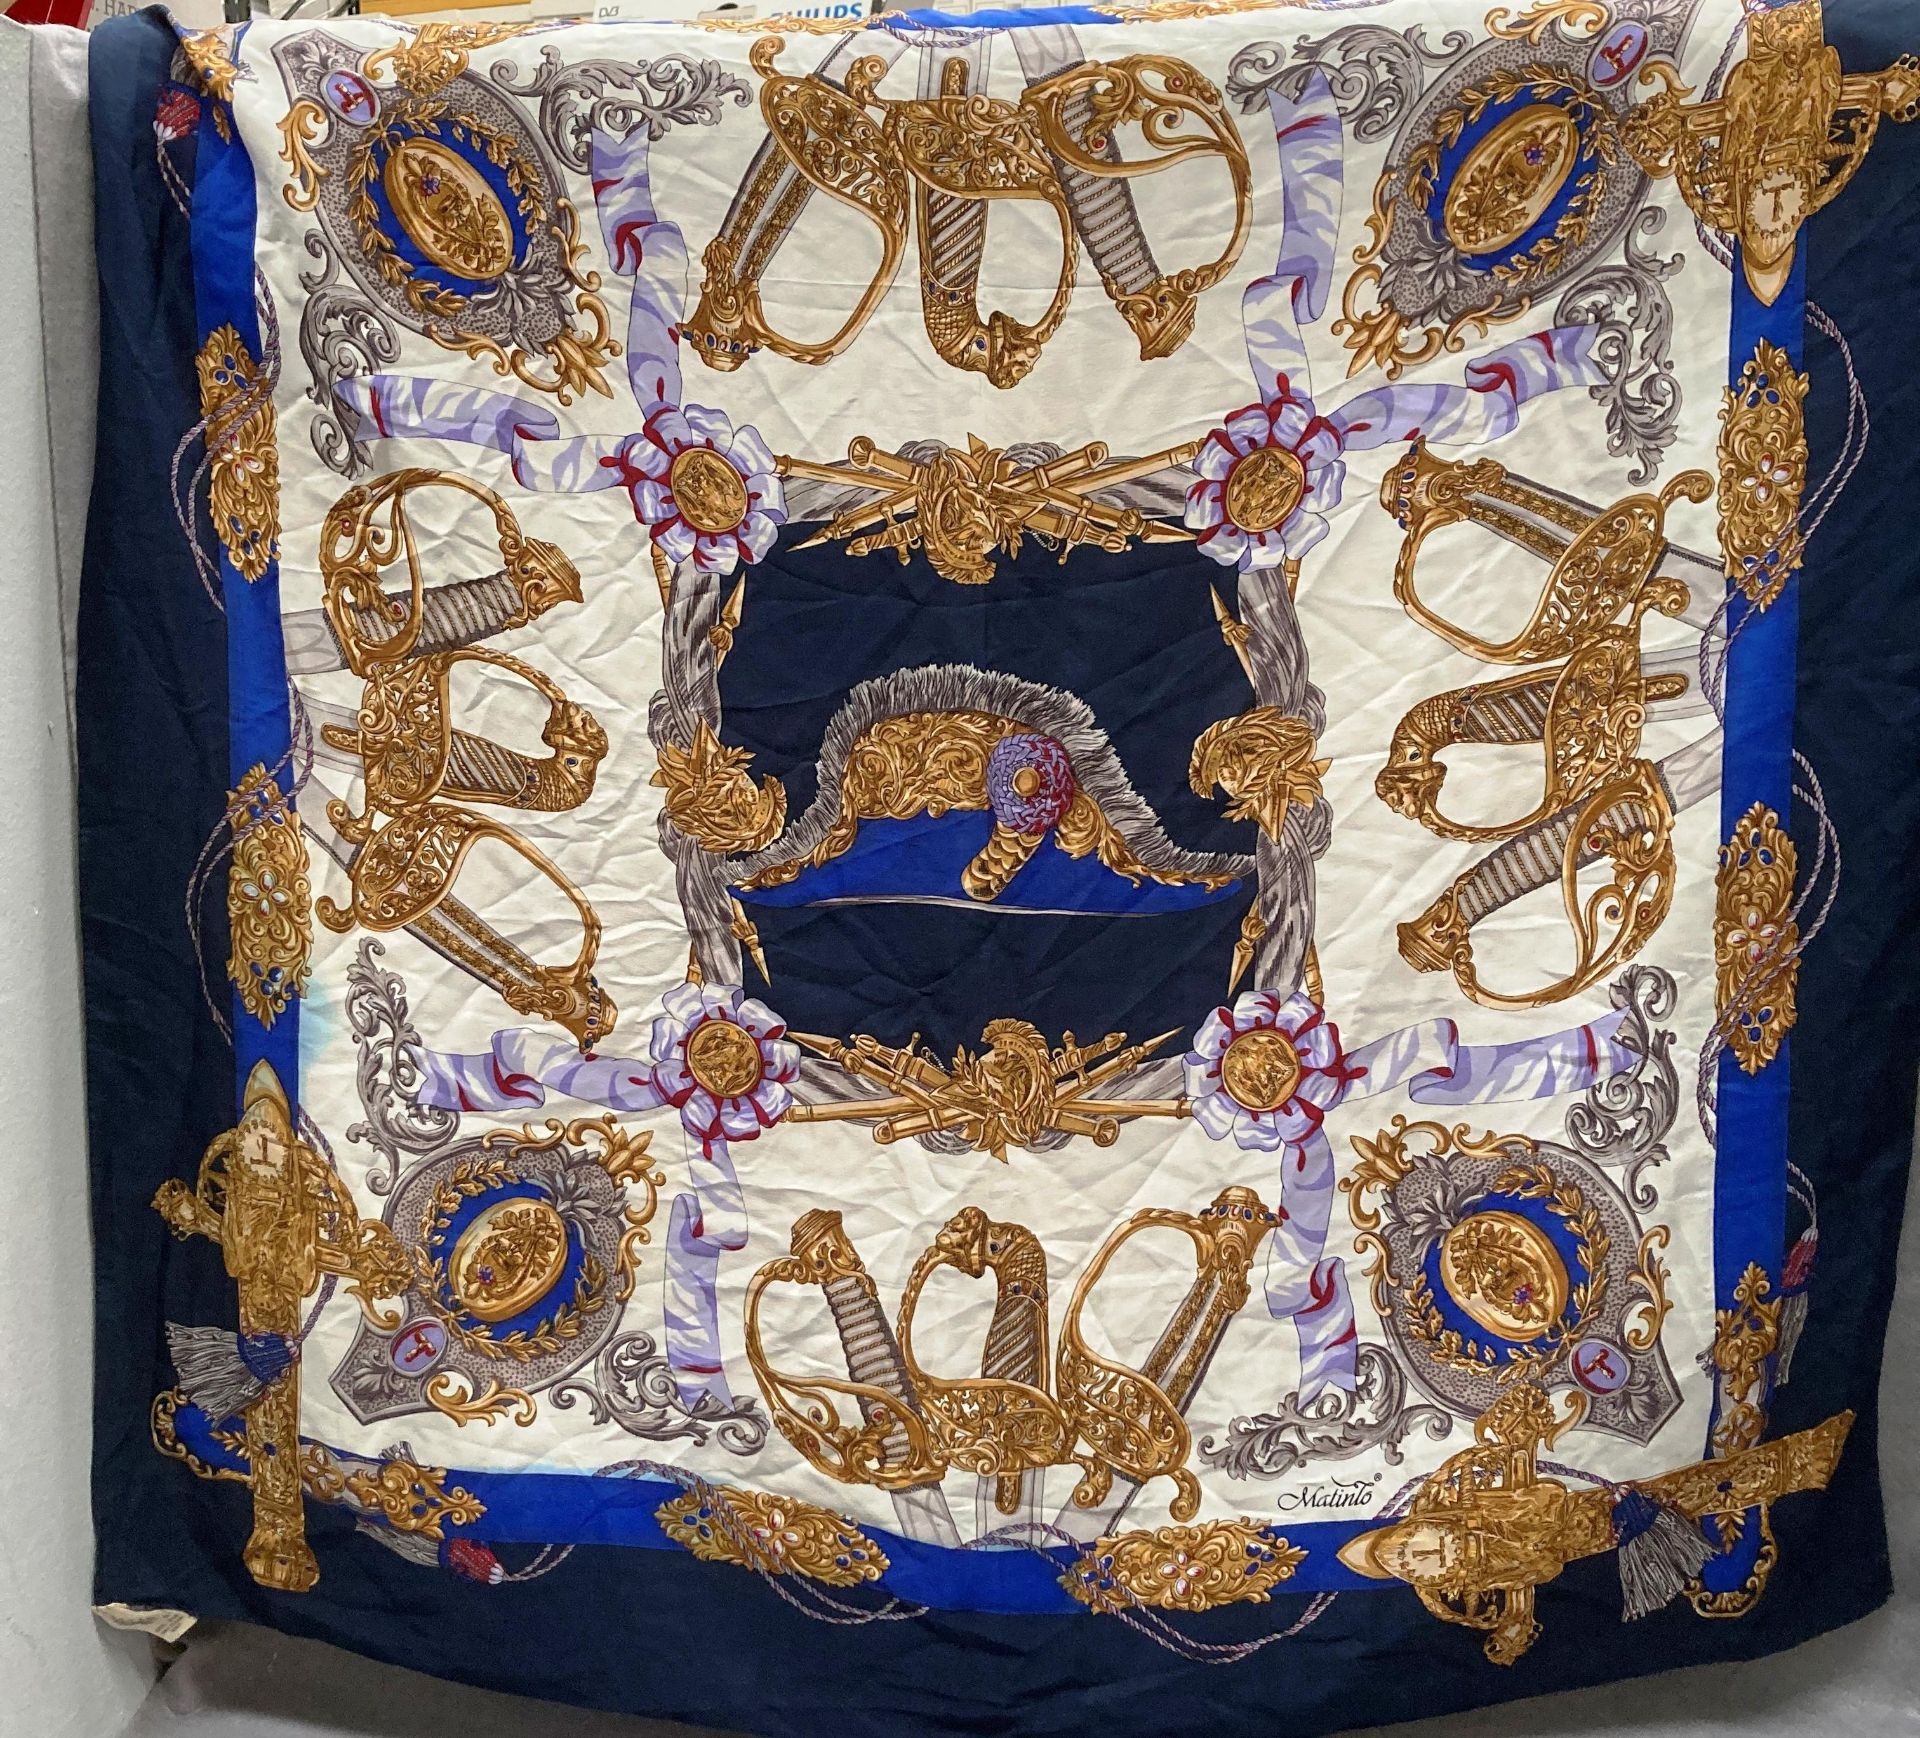 Five heraldic design etc. silk scarves by Matinto, etc. - Image 4 of 7